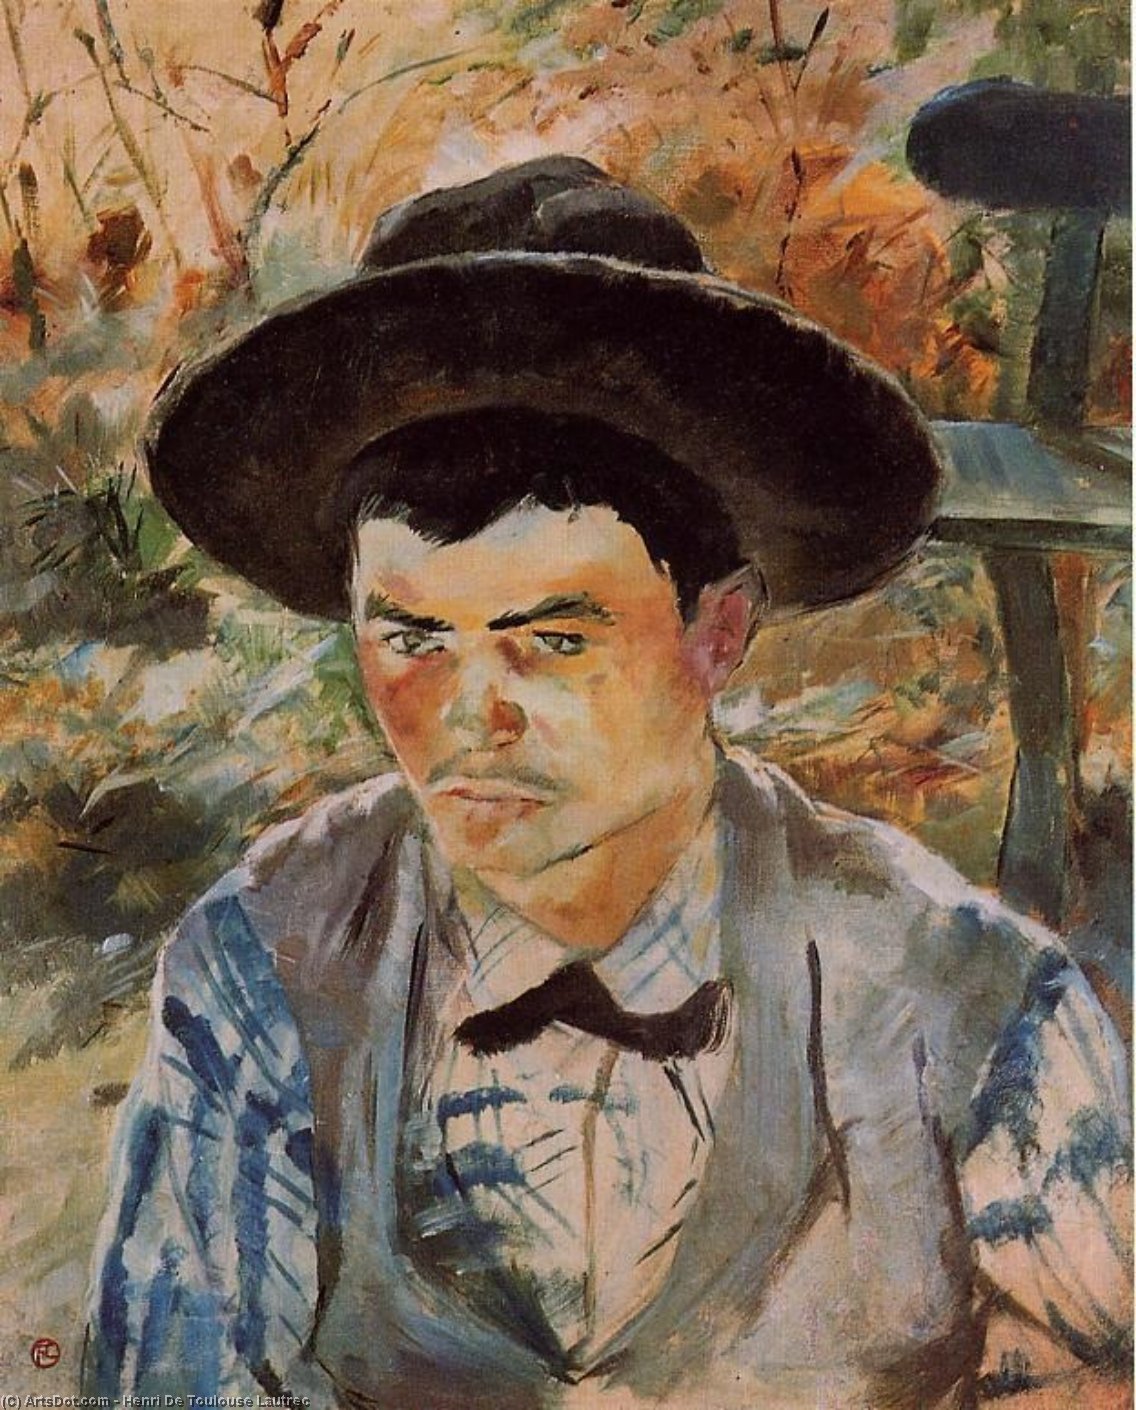 Order Oil Painting Replica The Young Routy in Celeyran, 1883 by Henri De Toulouse Lautrec (1864-1901, France) | ArtsDot.com